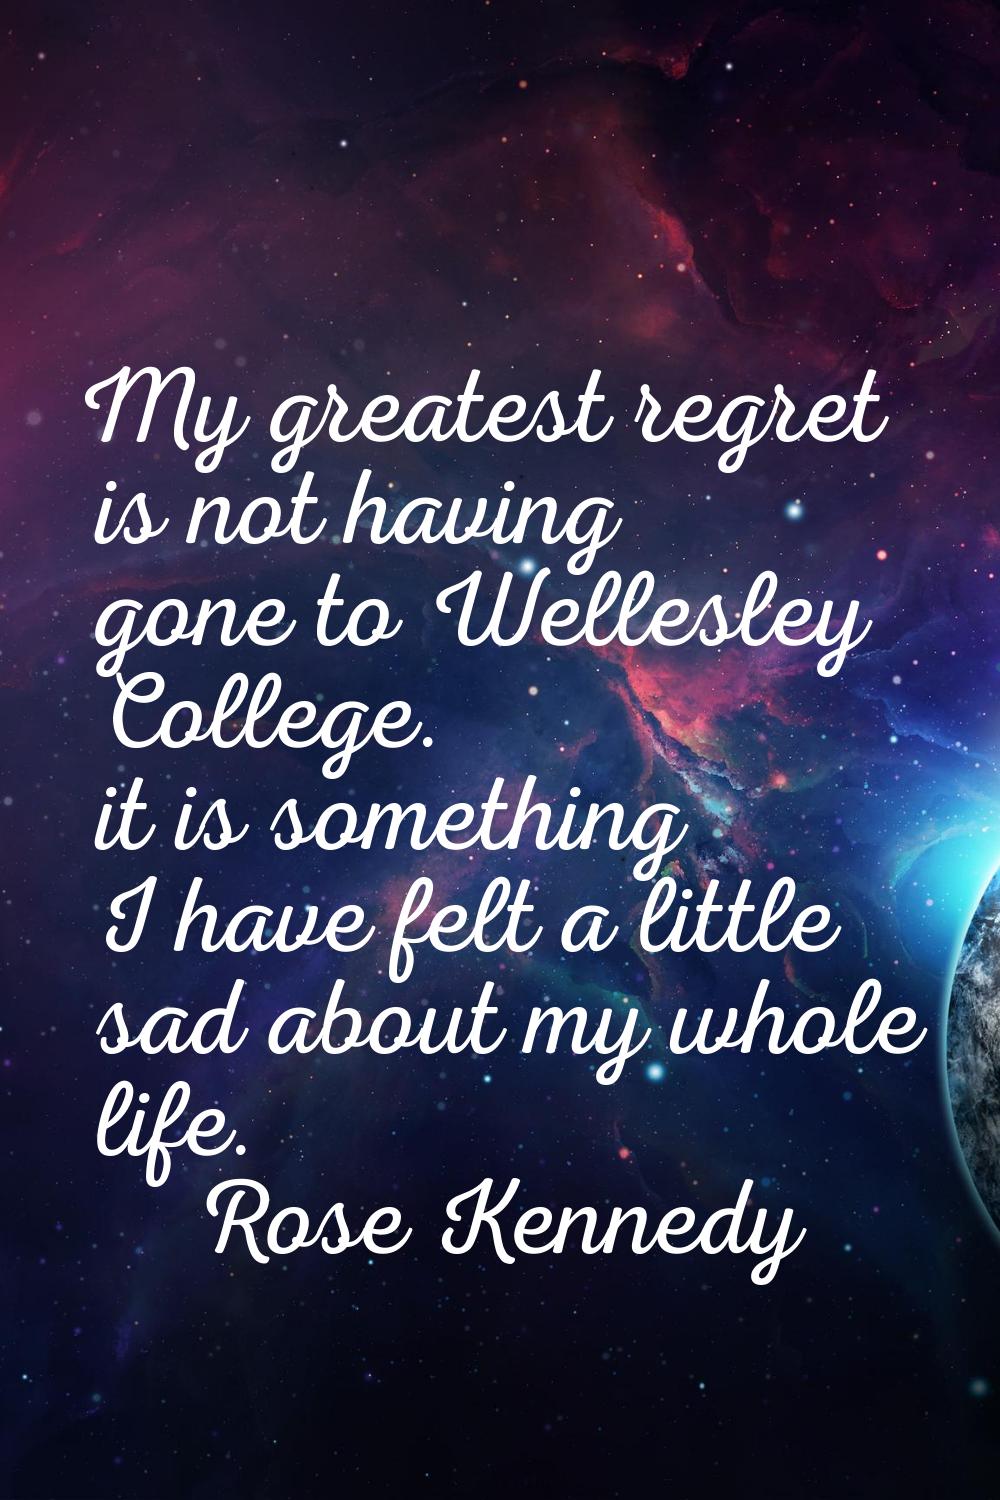 My greatest regret is not having gone to Wellesley College. it is something I have felt a little sa